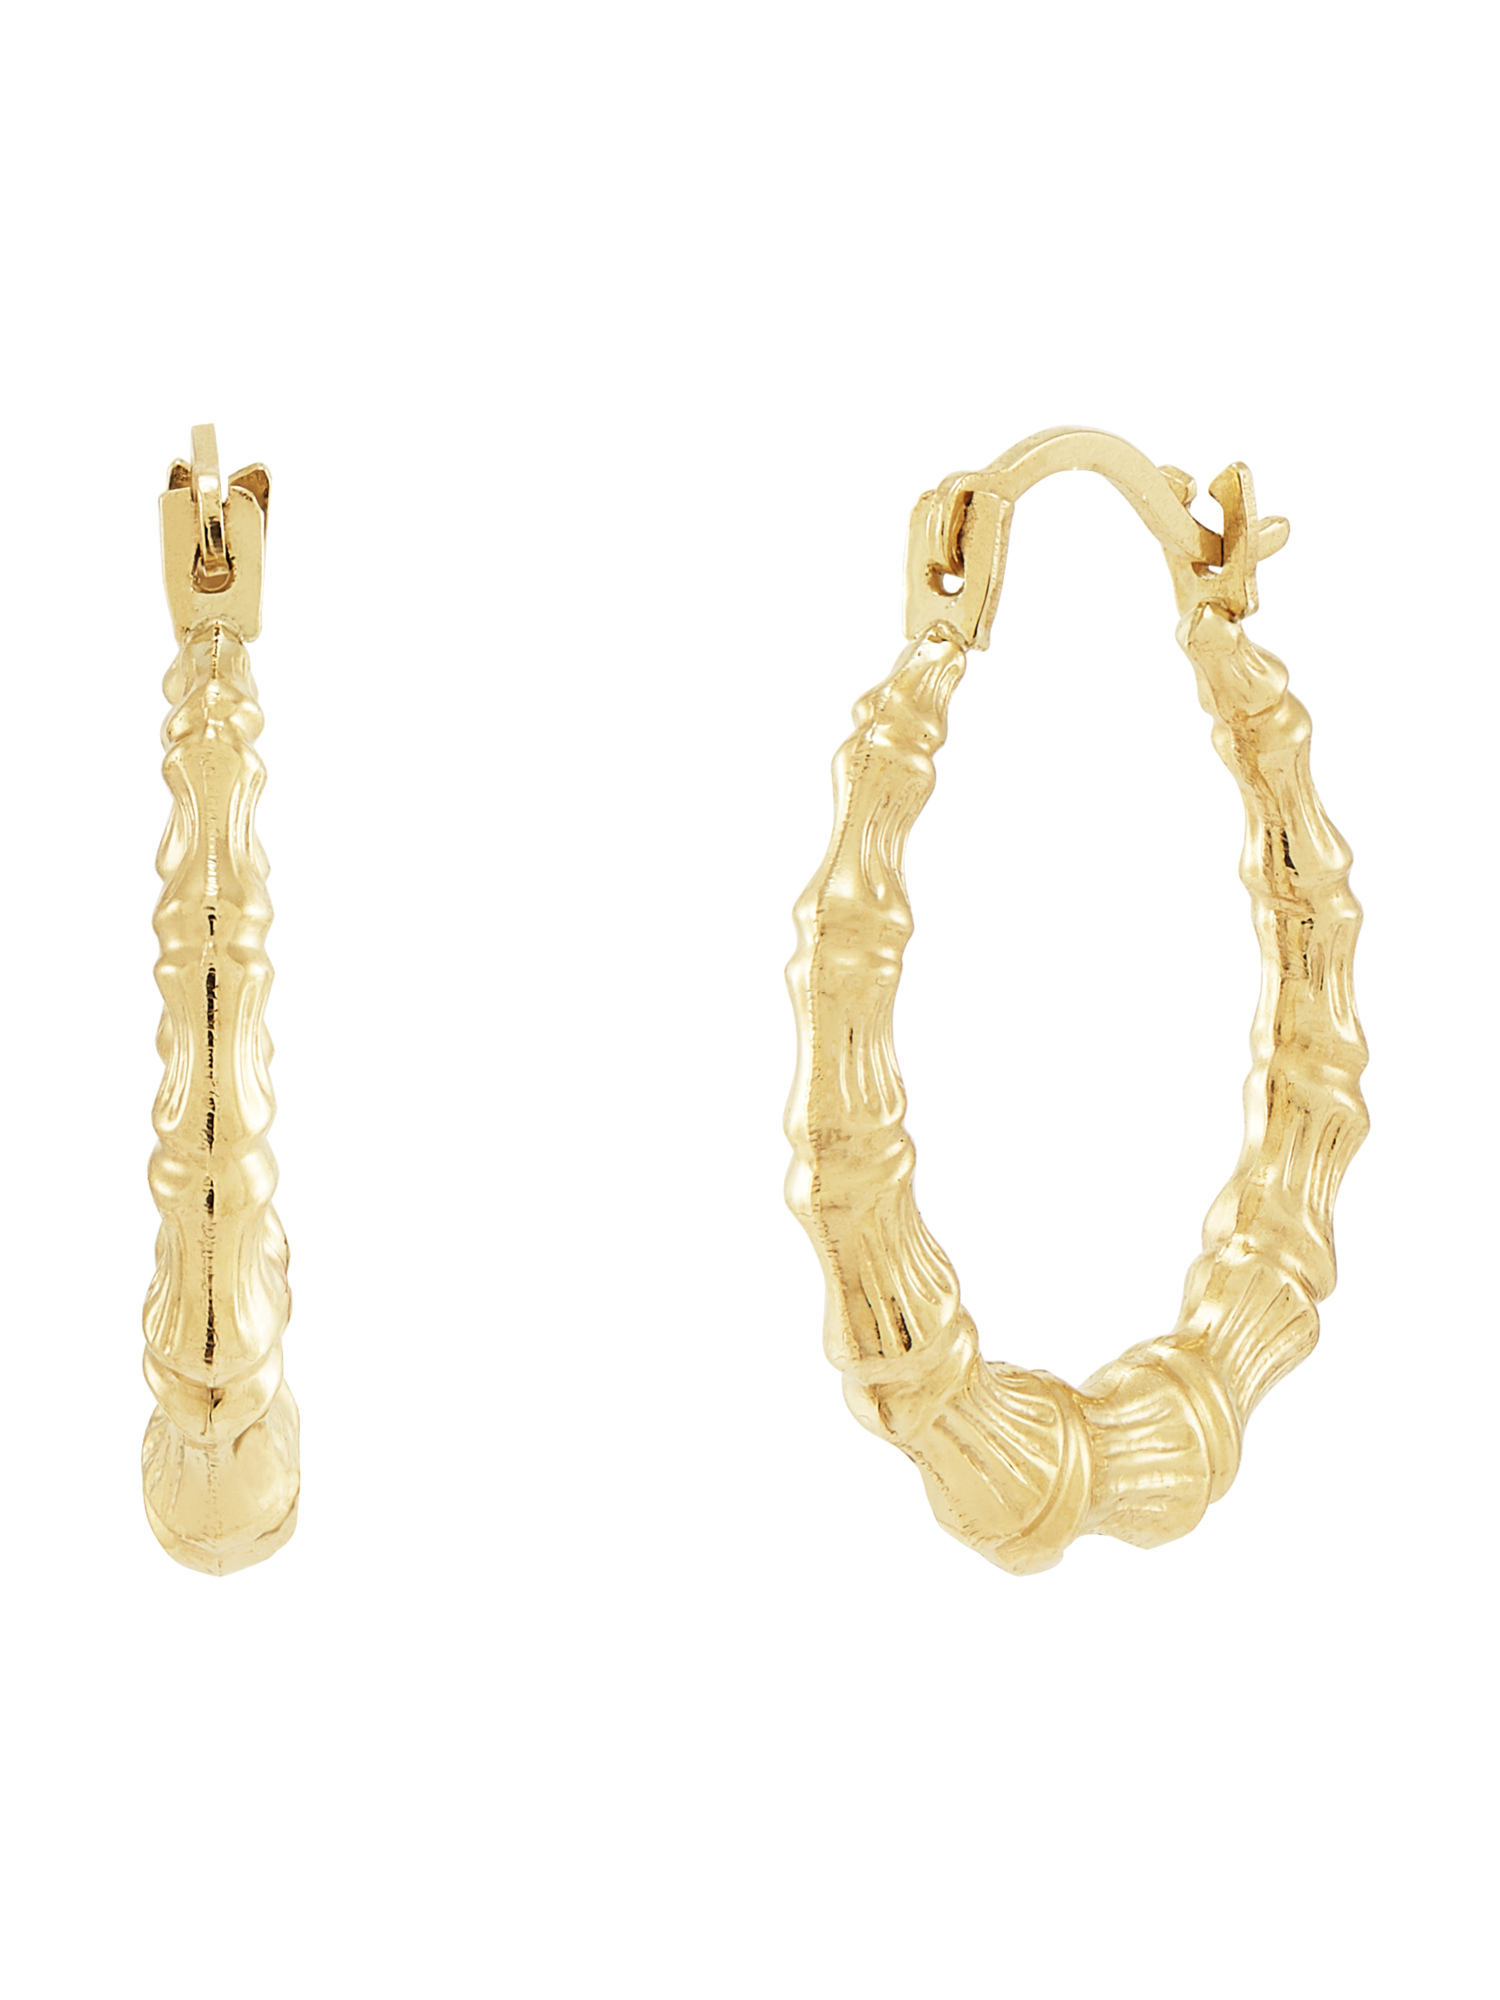 Brilliance Fine Jewelry 10K Yellow Gold Hollow Round Bamboo Hoop Earrings - image 3 of 4